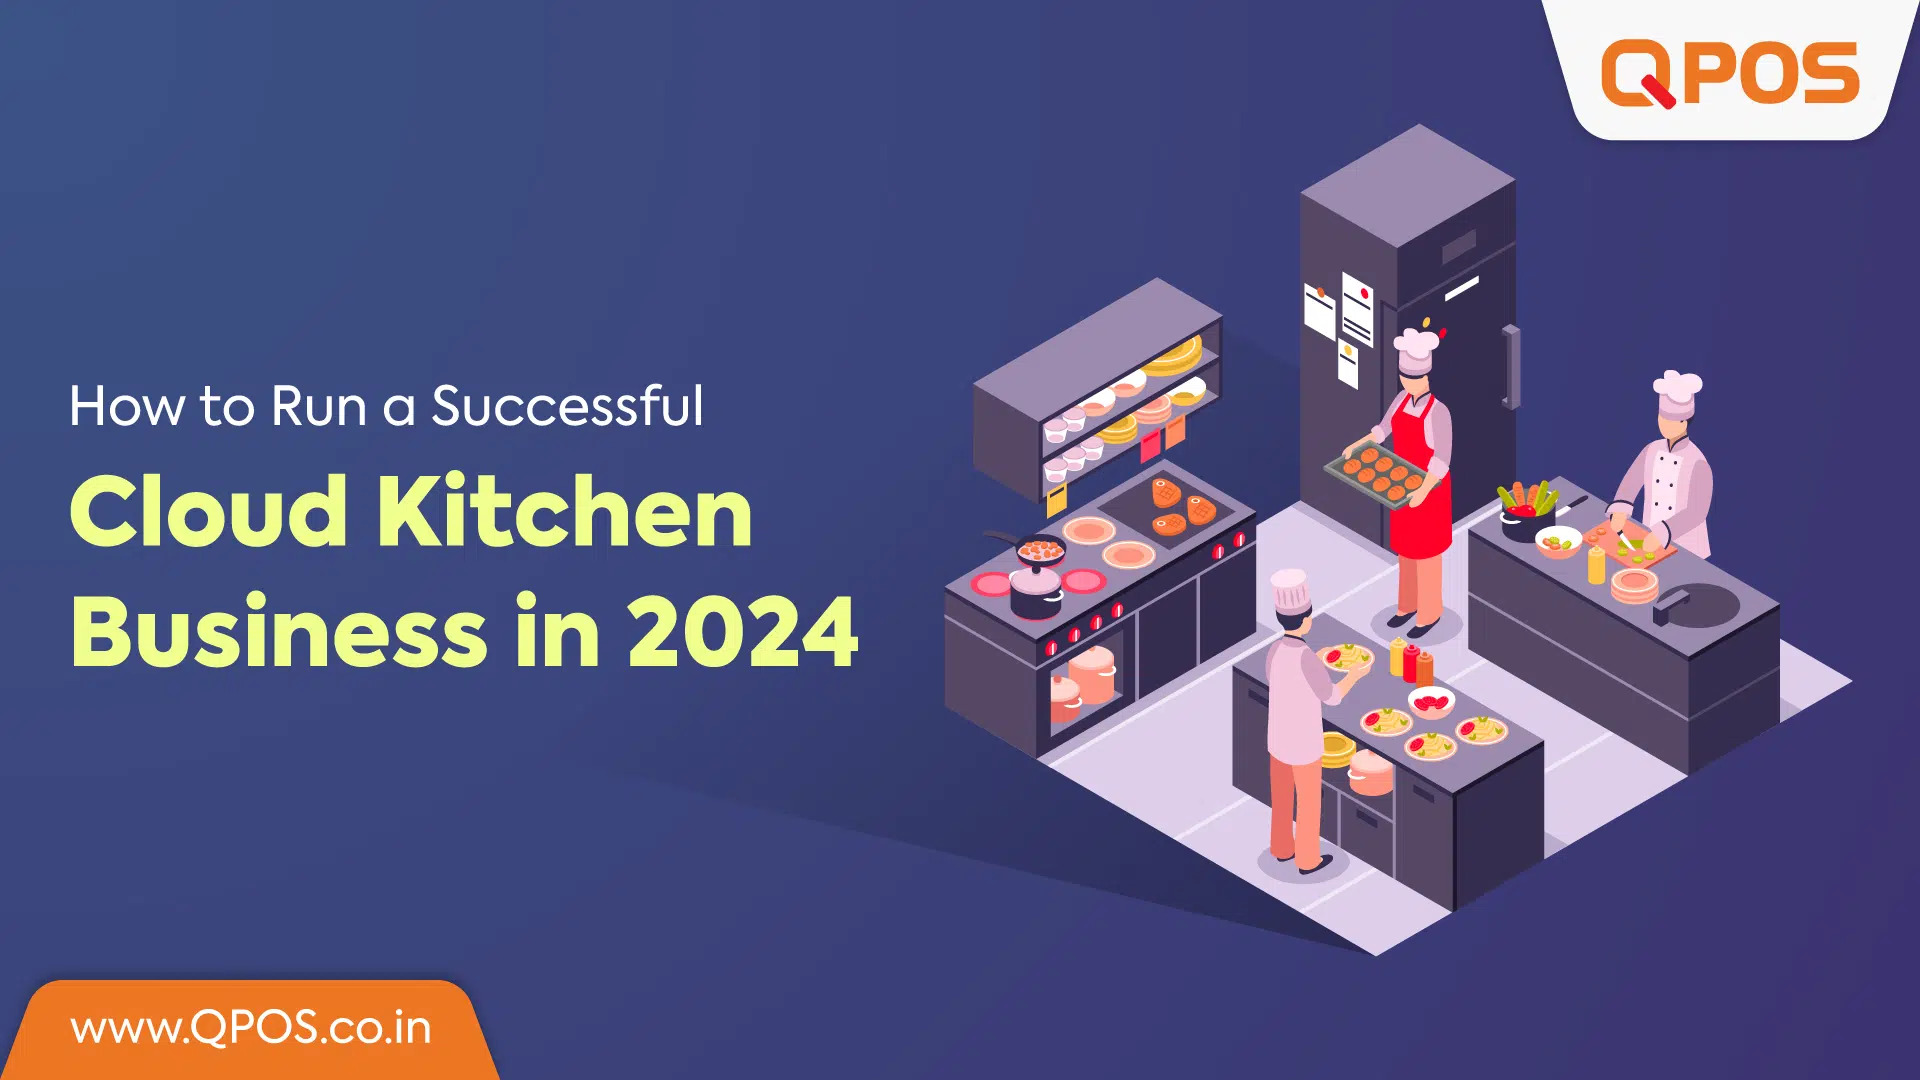 QPOS-How-to-Run-a-Successful-Cloud-Kitchen-Business-in-2024.png